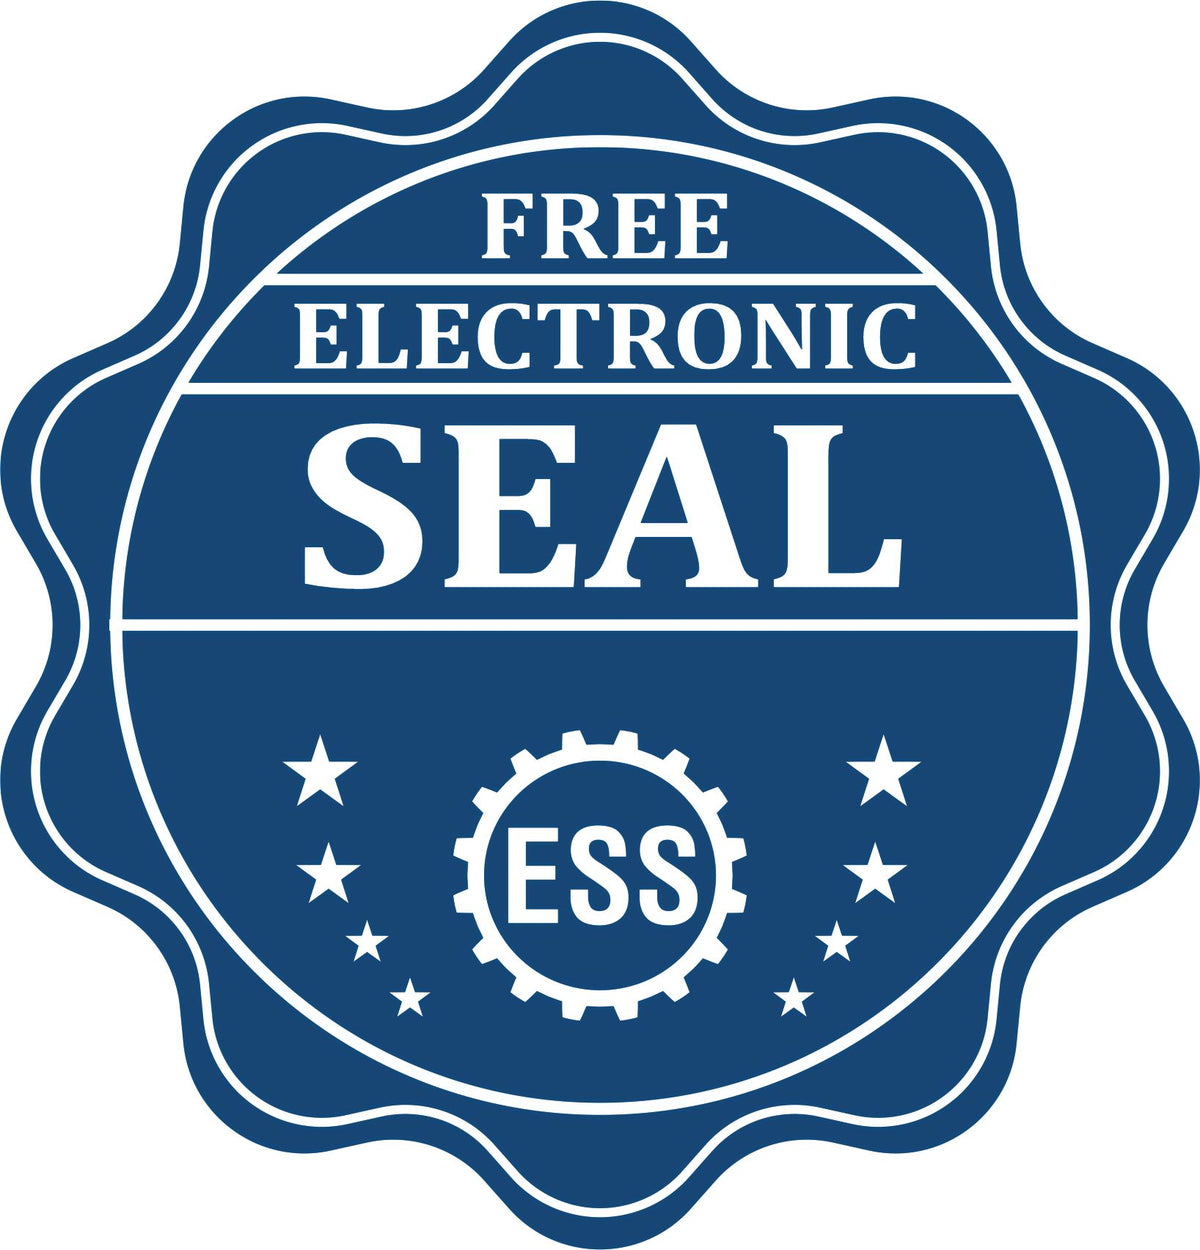 A badge showing a free electronic seal for the Slim Pre-Inked Rectangular Notary Stamp for Colorado with stars and the ESS gear on the emblem.